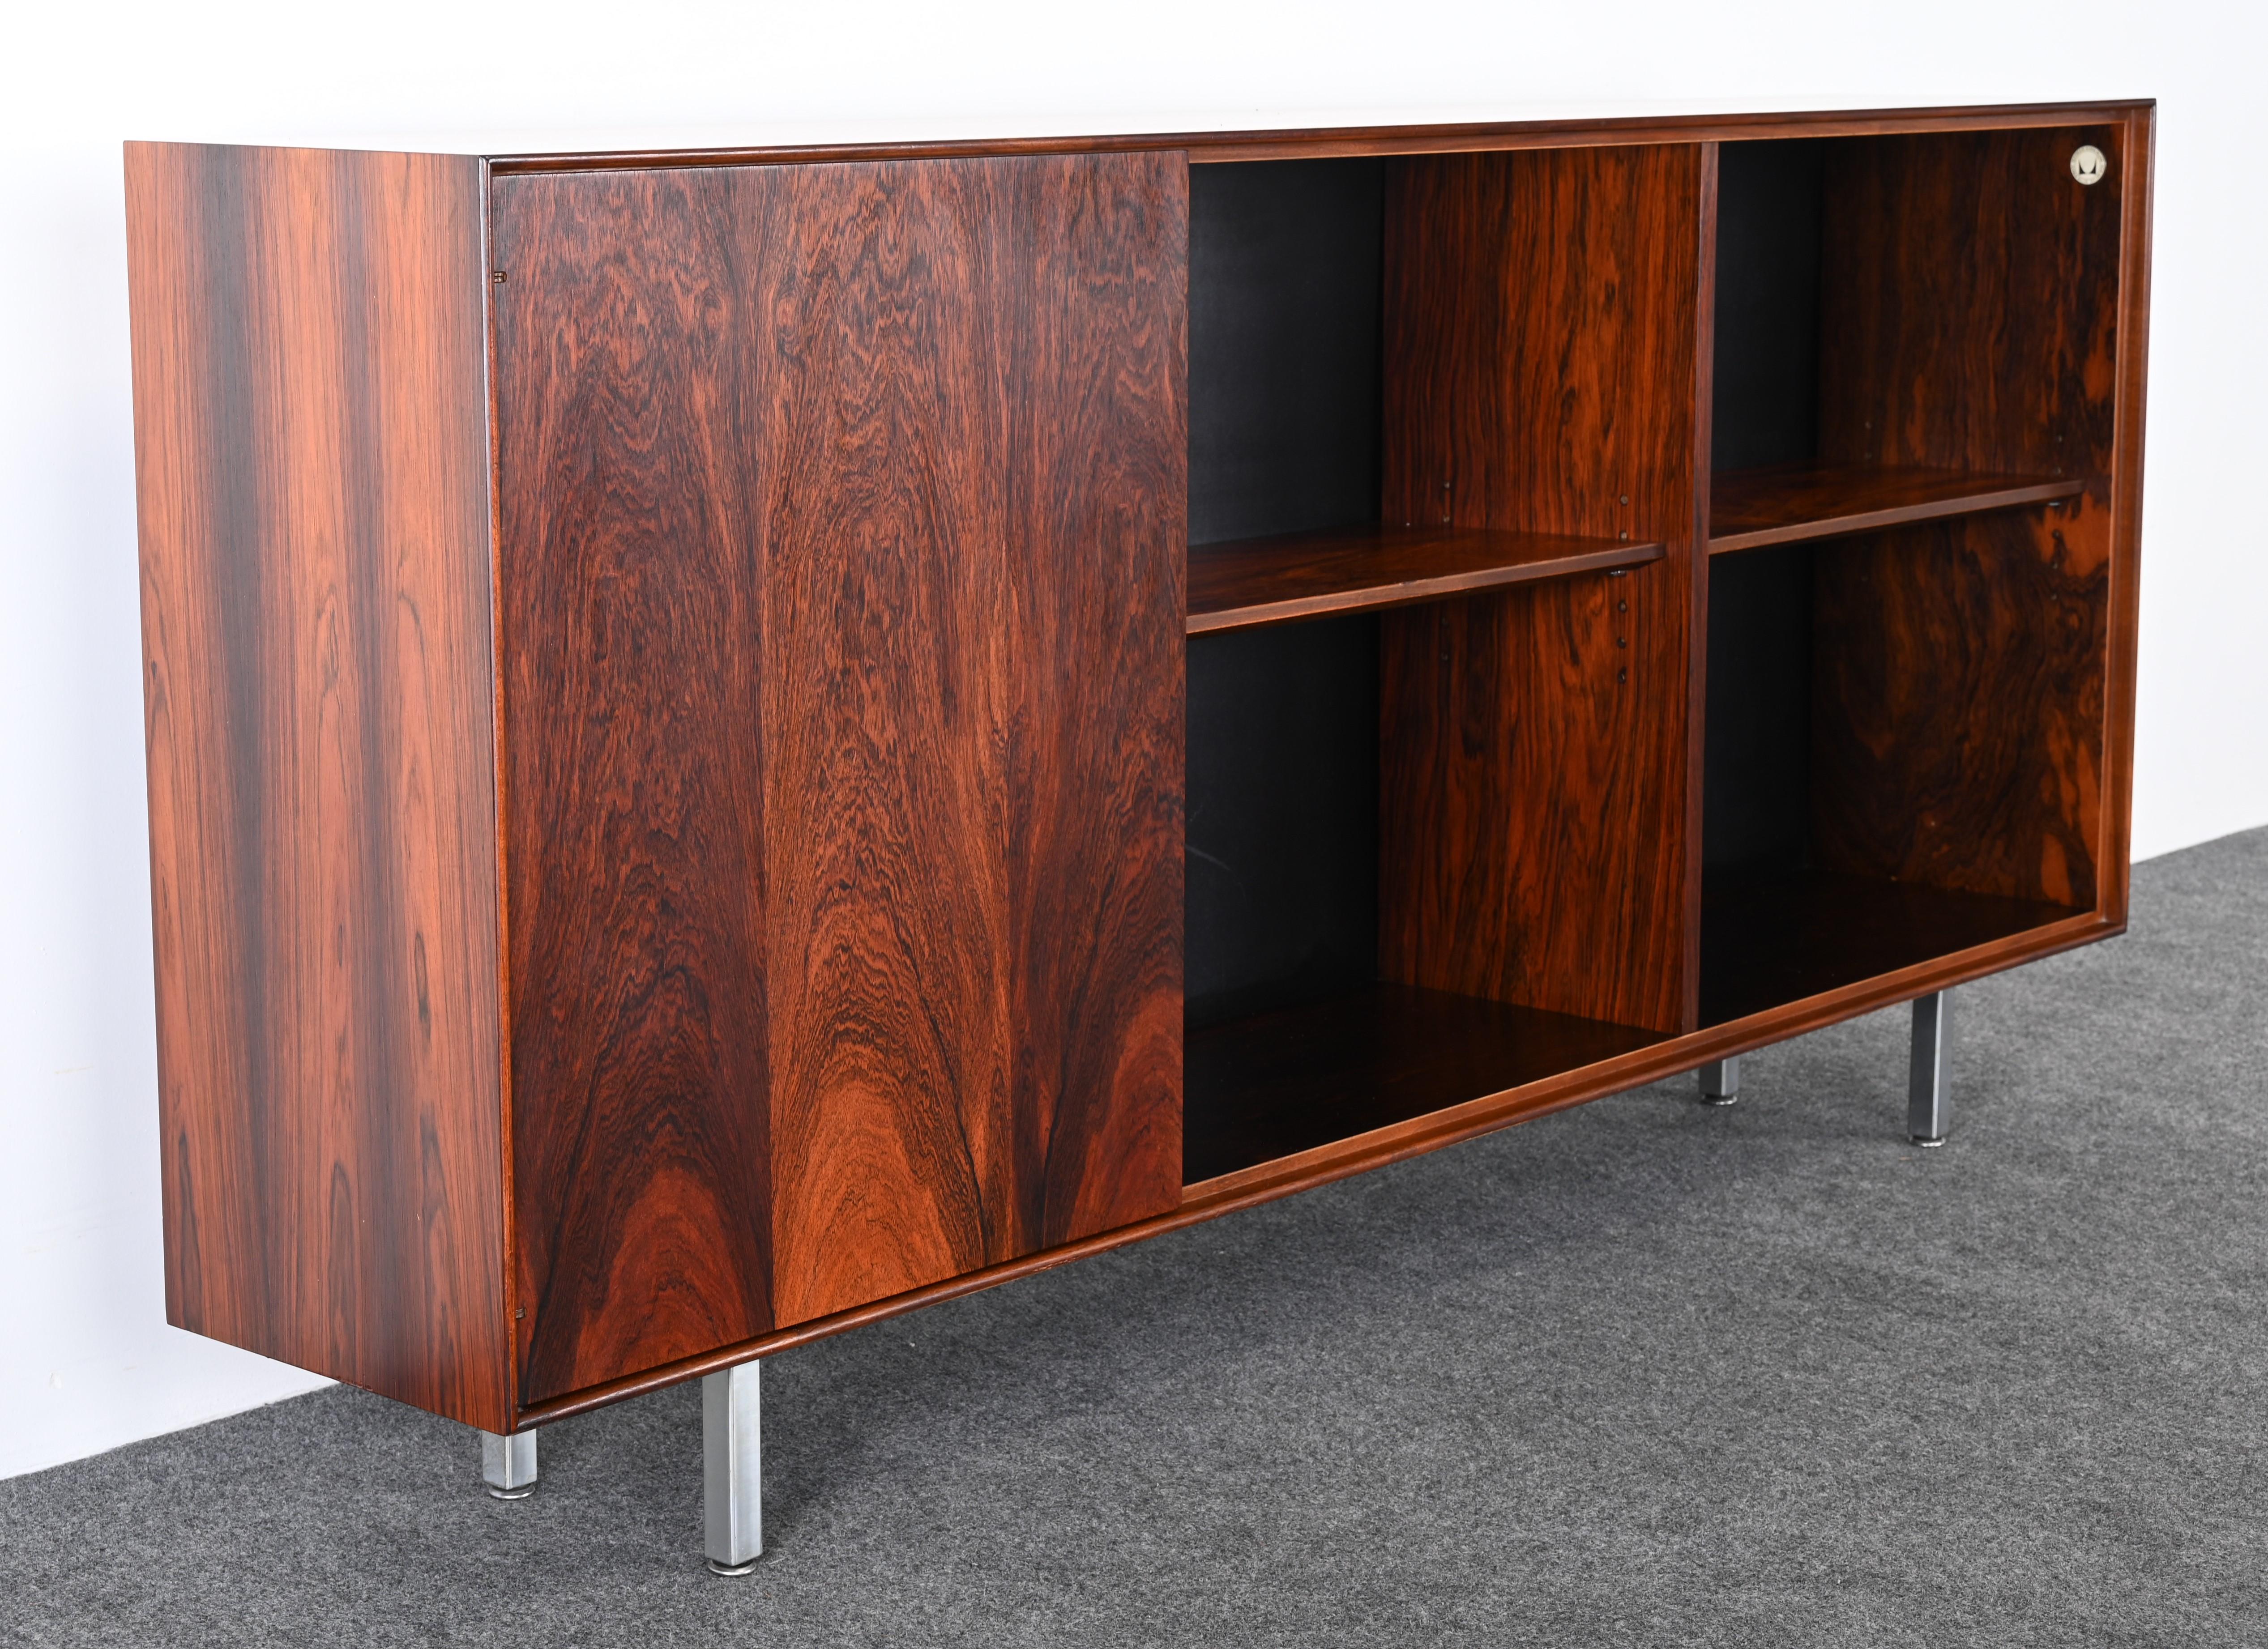 Rosewood Thin Edge Bookshelf by George Nelson for Herman Miller, 1950s For Sale 3